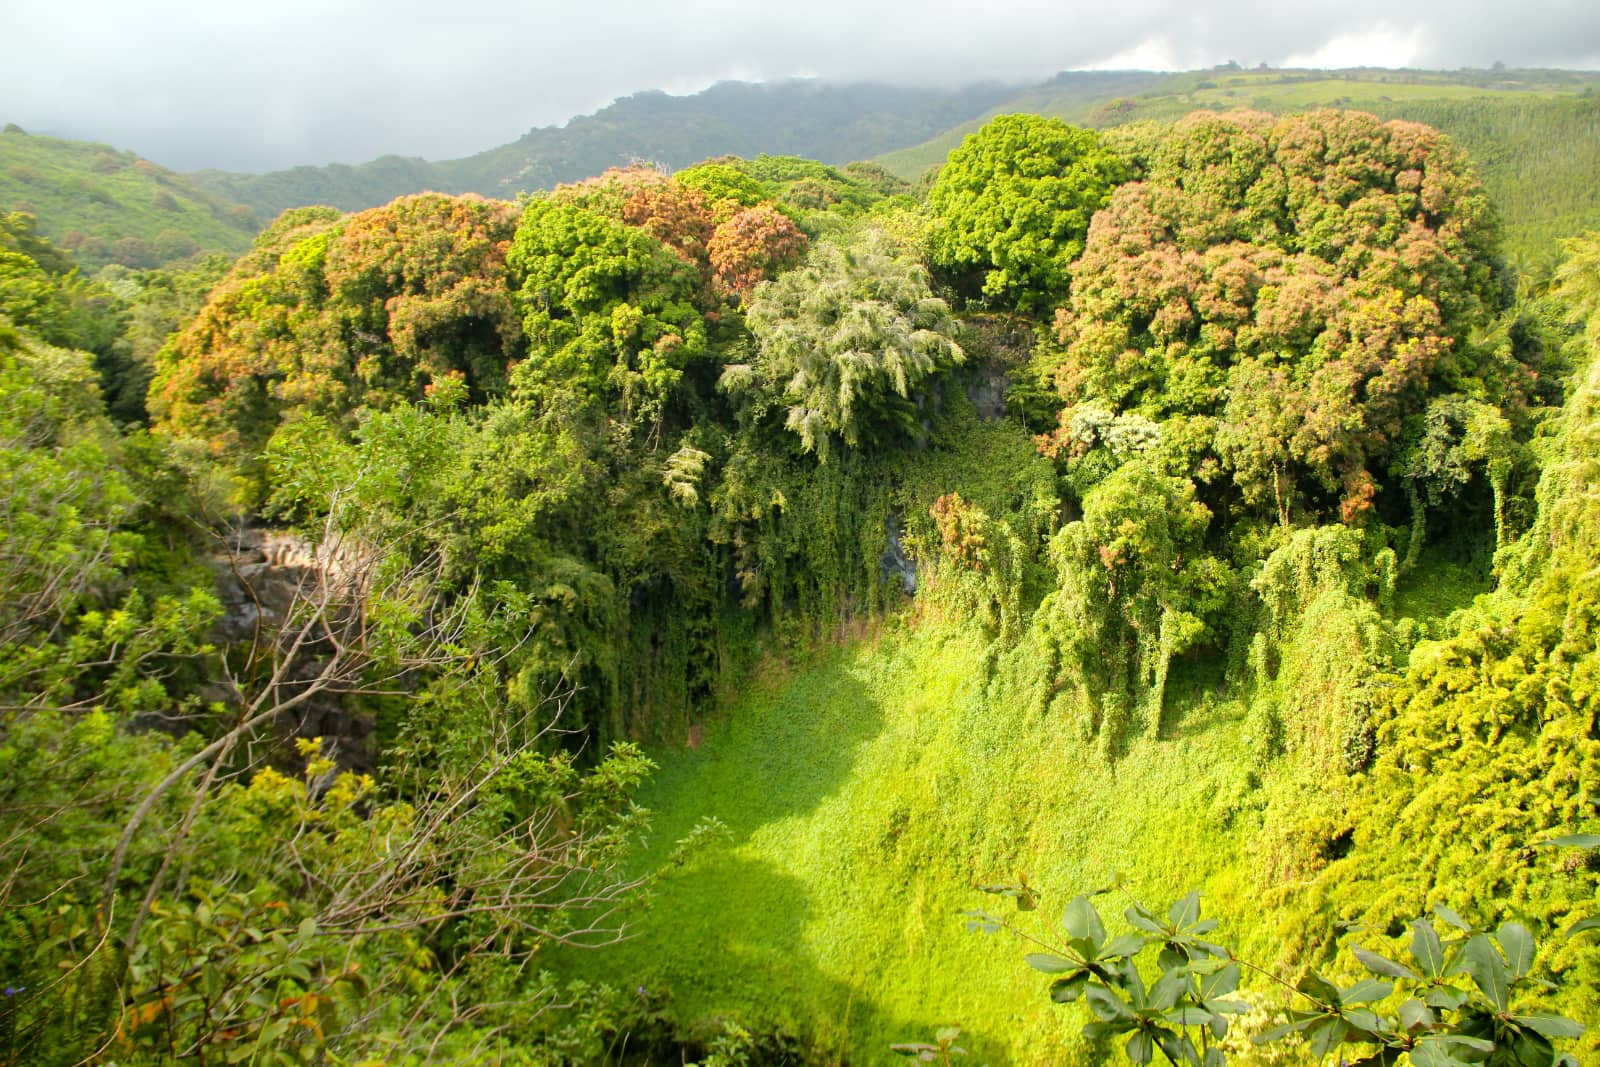 Lush green vegetation in foreground with mountains in background